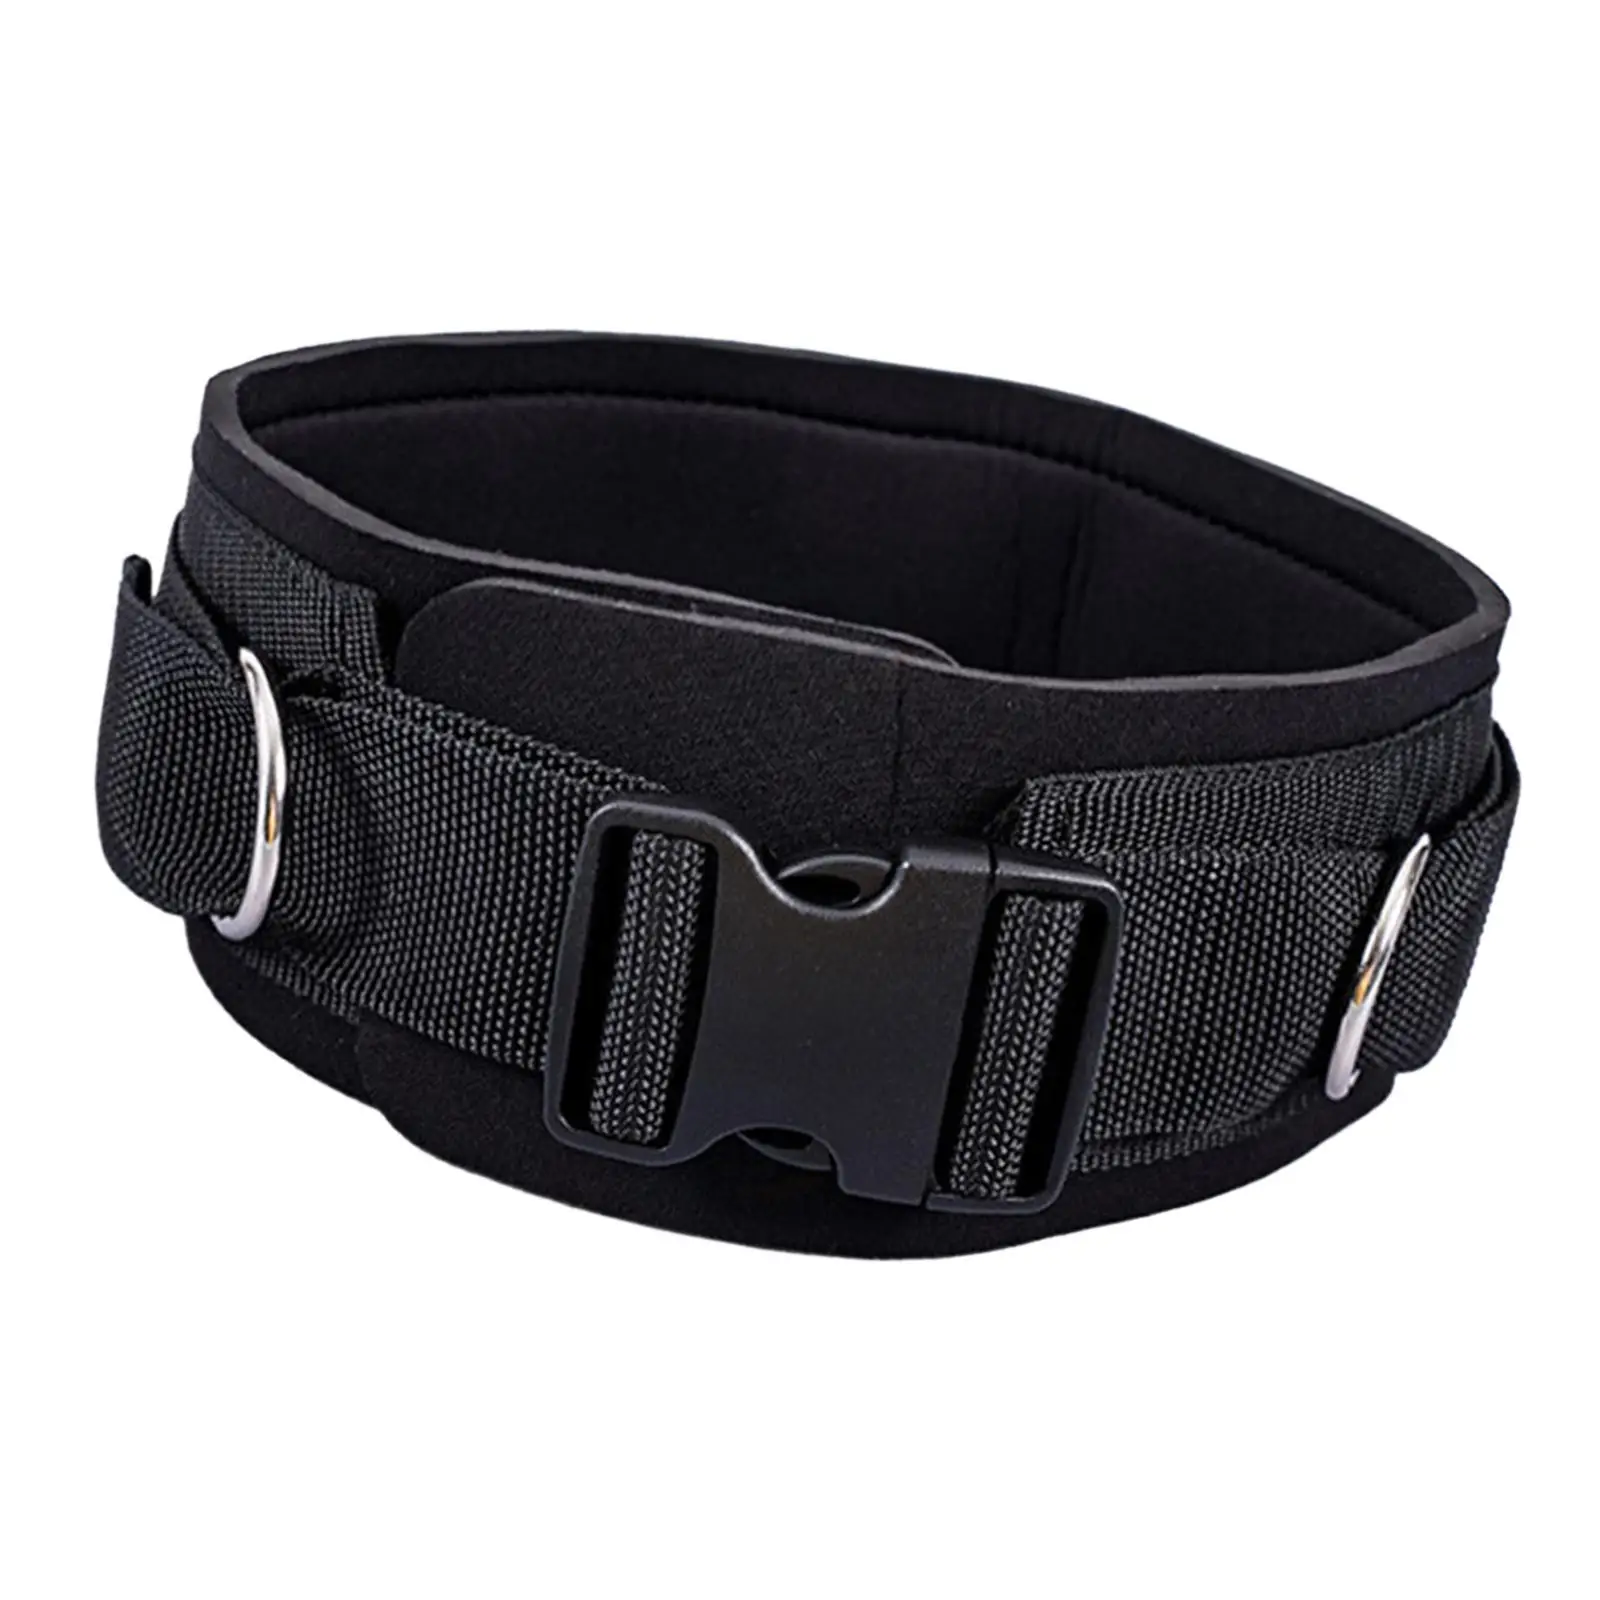 Weight Lifting Belt Quick Release Buckle Body Building Exercise Waist Support